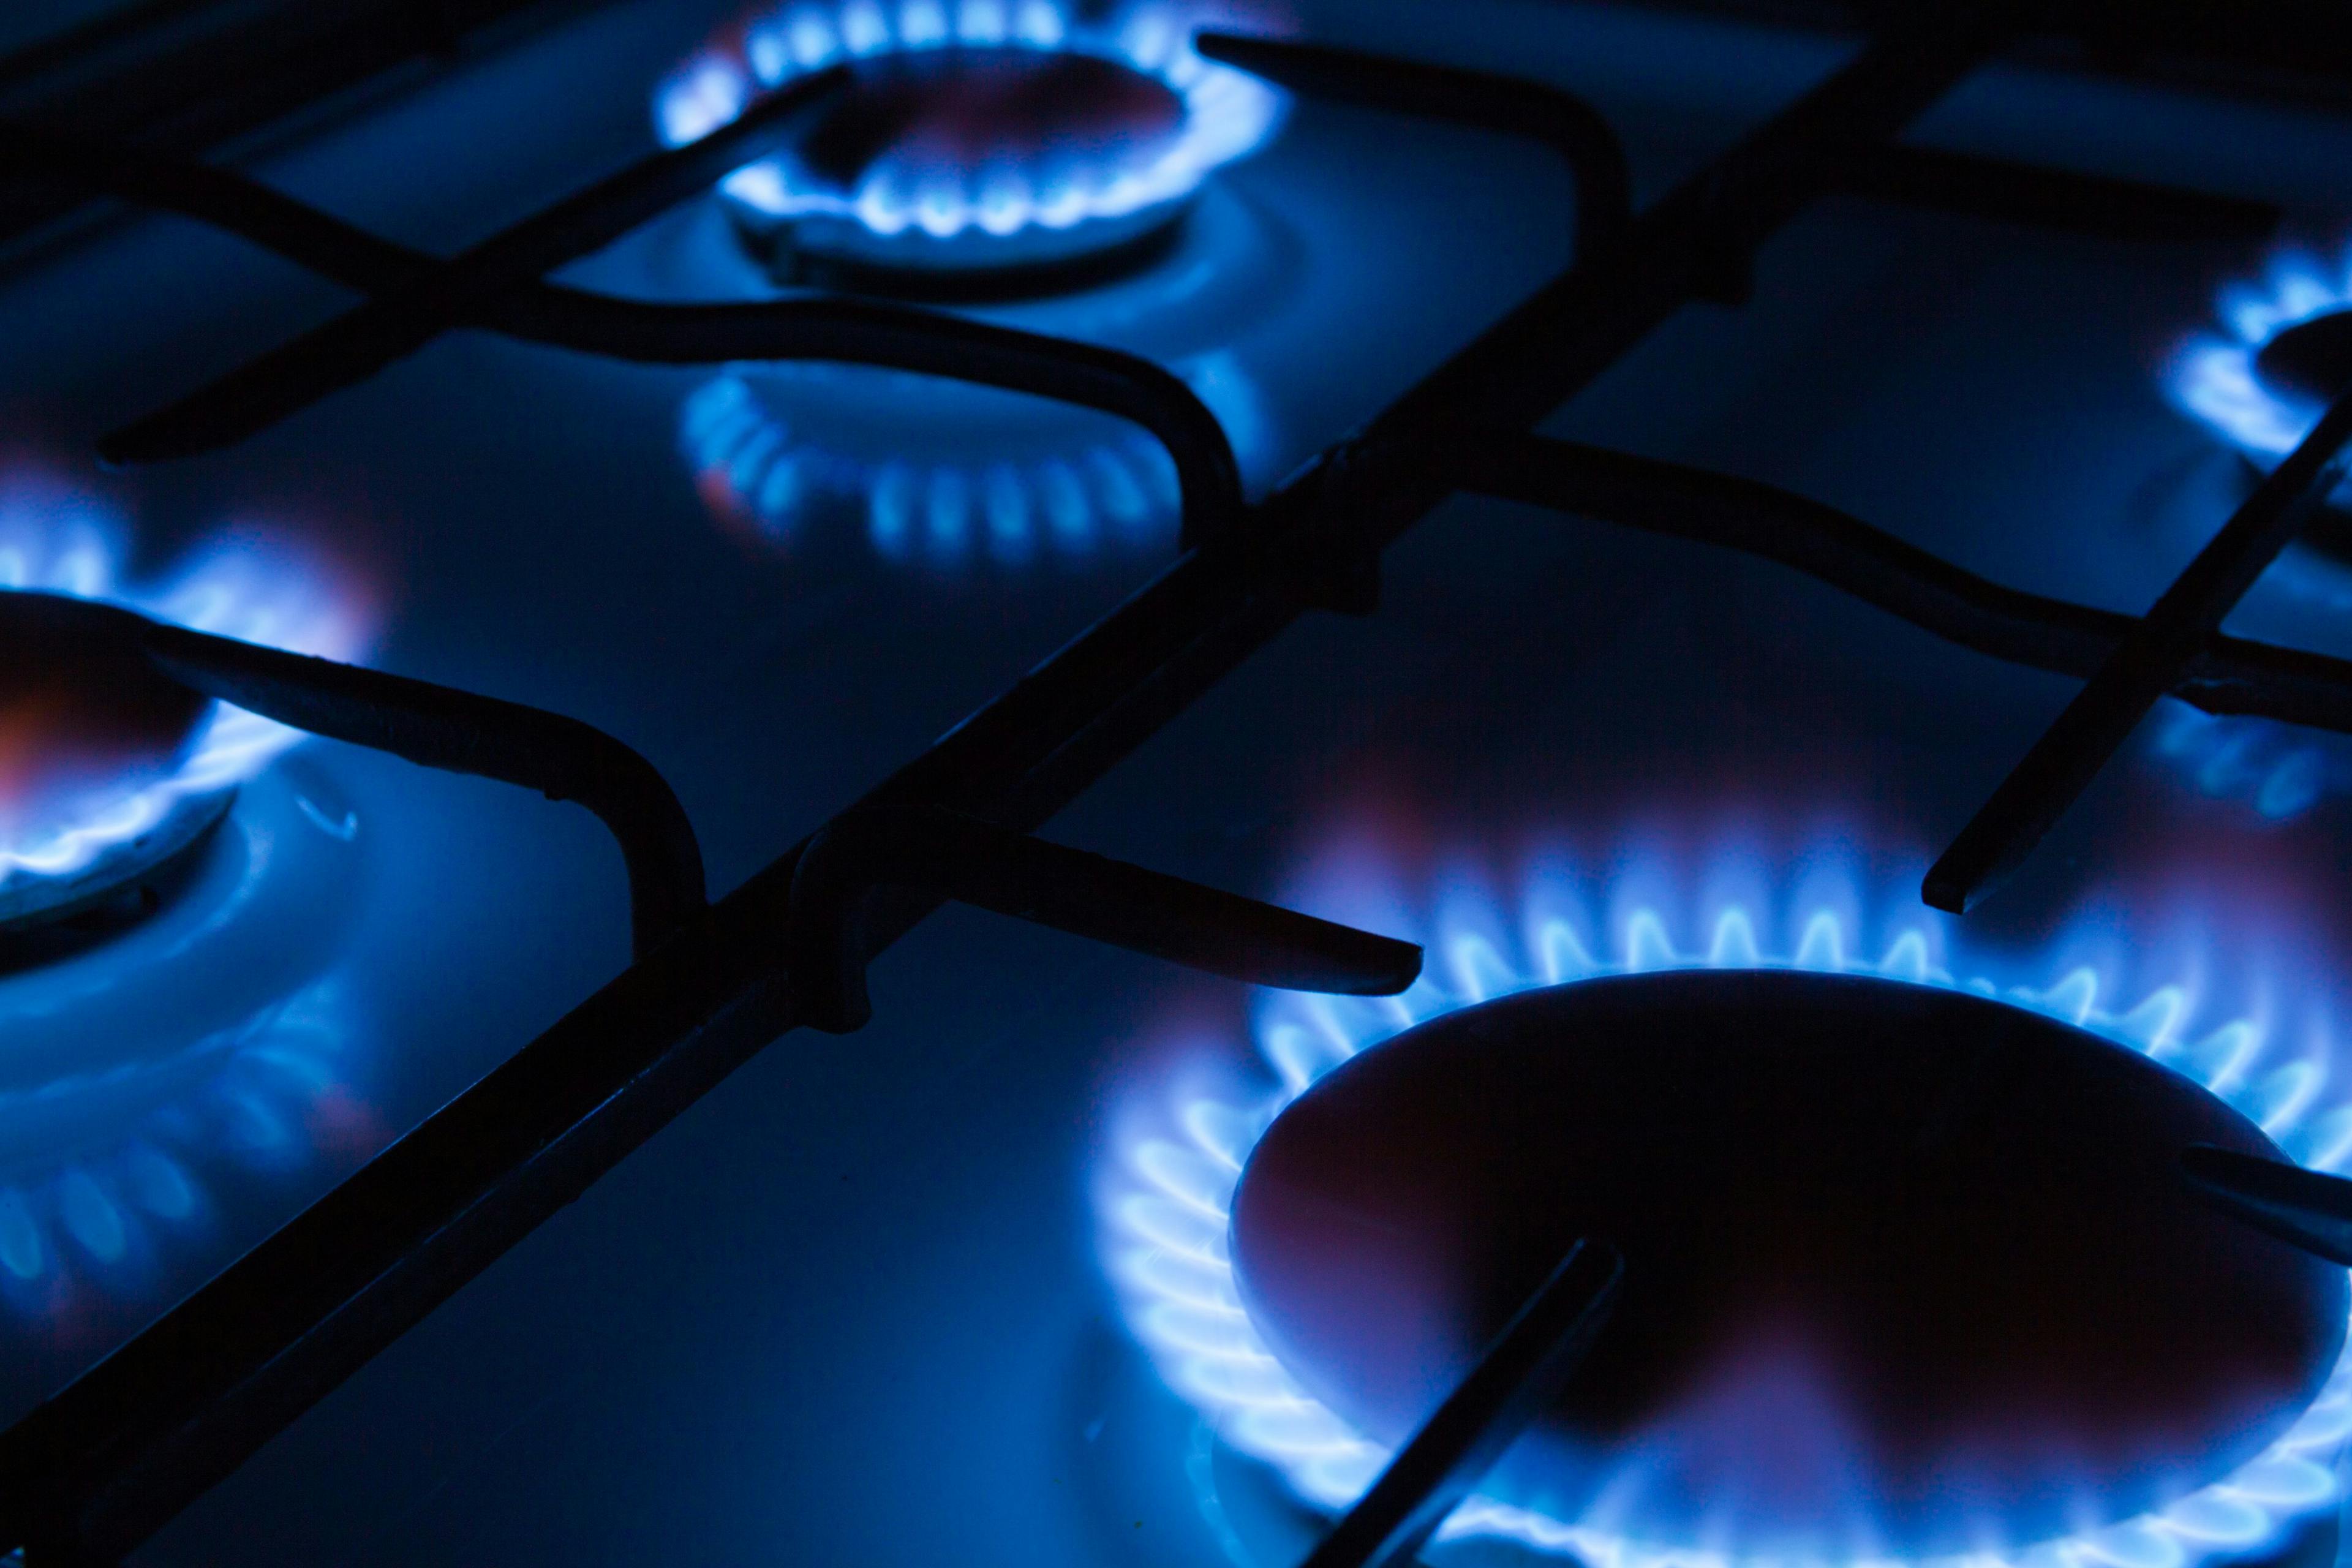 Study Finds Gas Stove Smoke Accounts for 12% of Childhood Asthma in the US